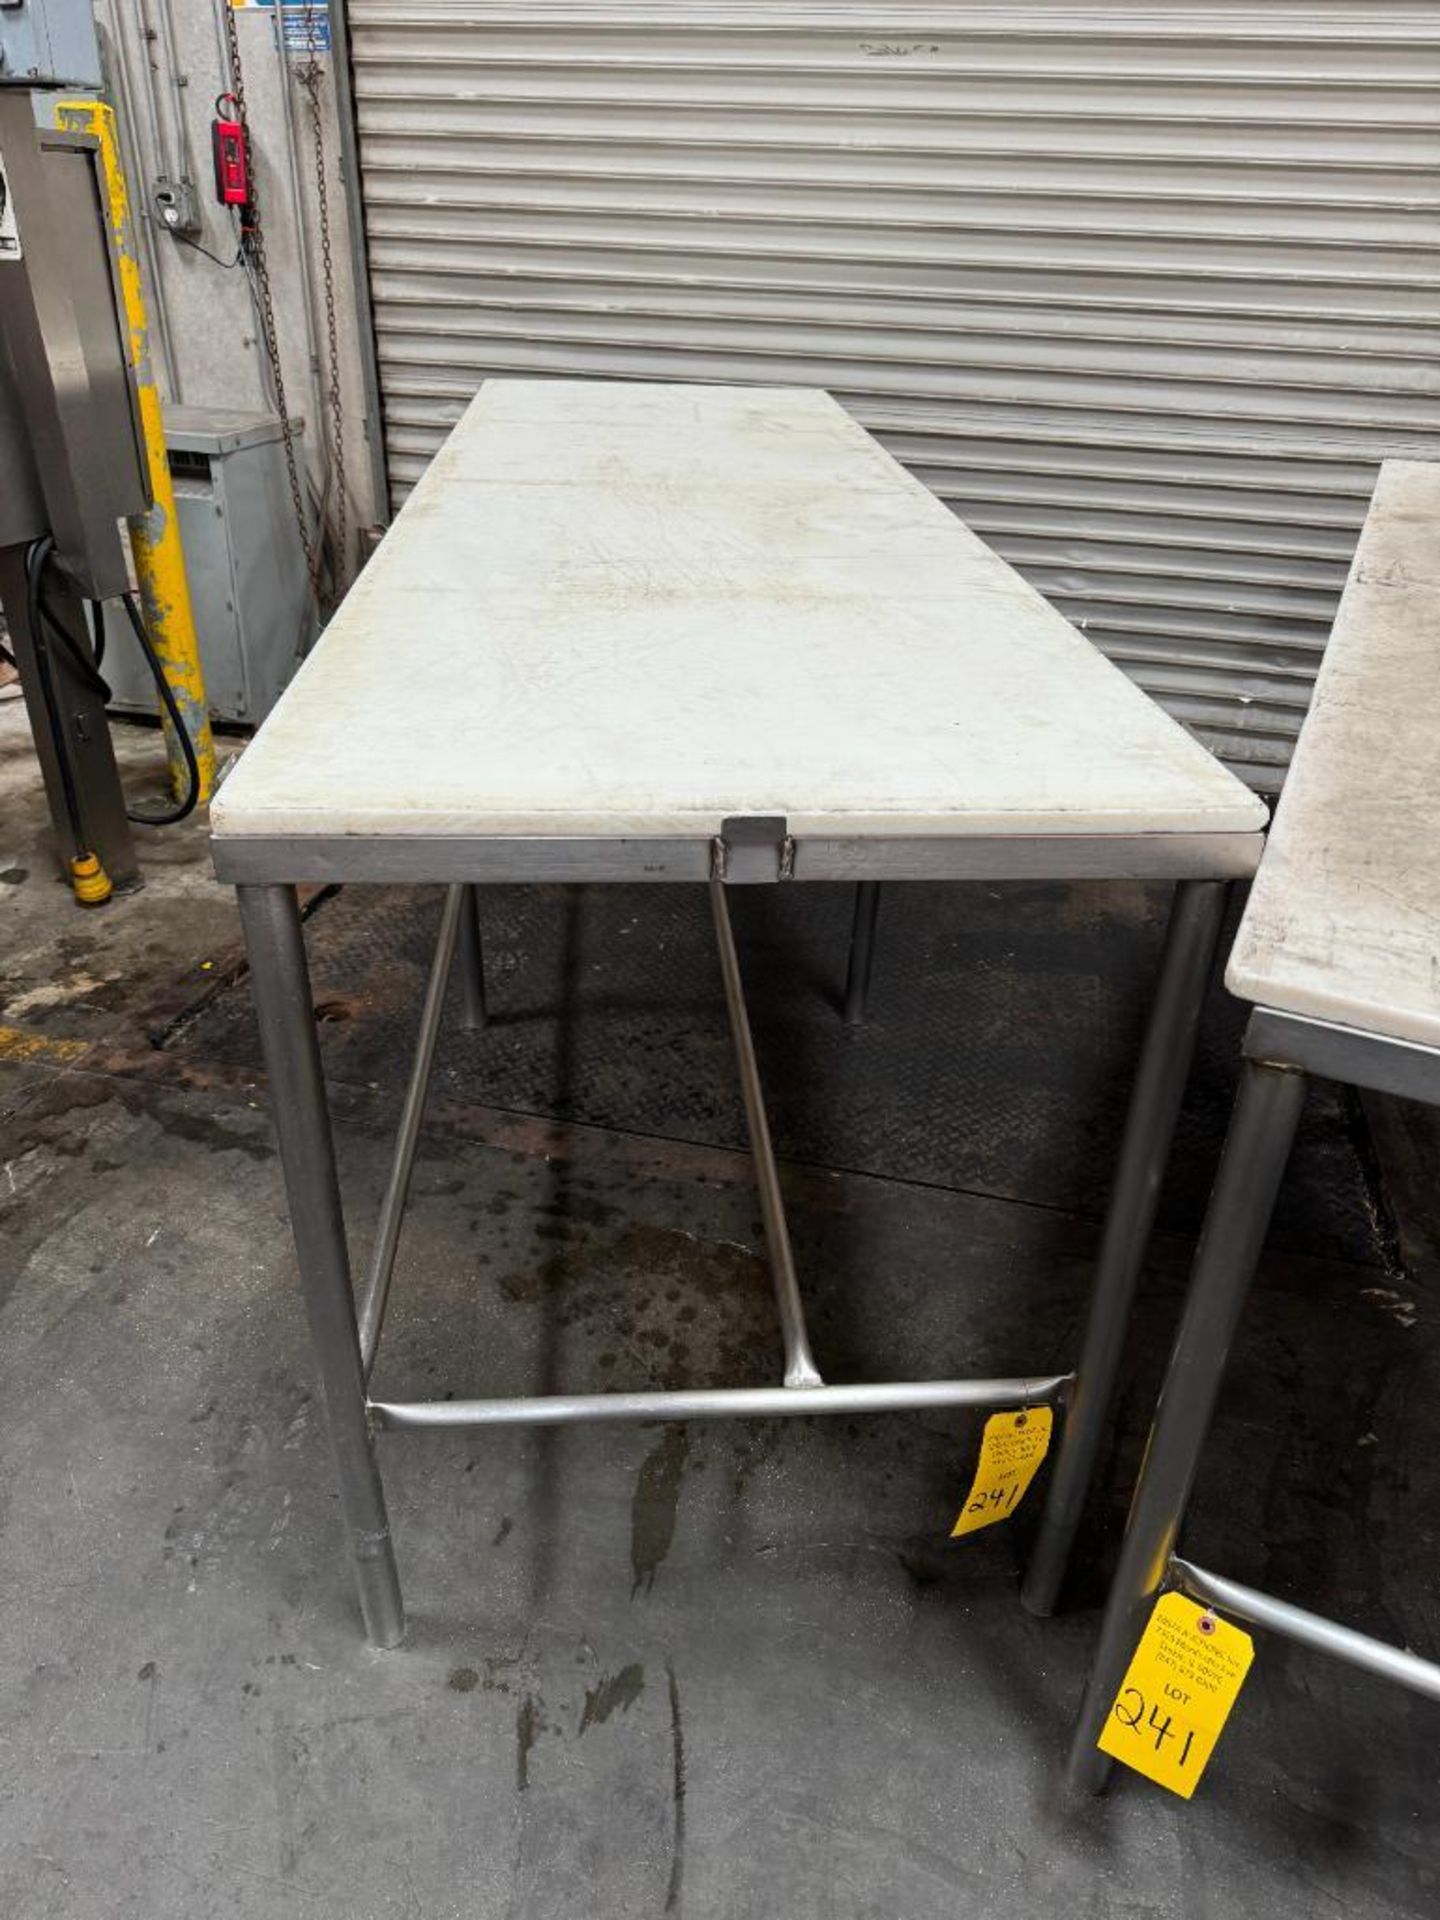 Stainless Steel Cutting Tables - Image 3 of 4